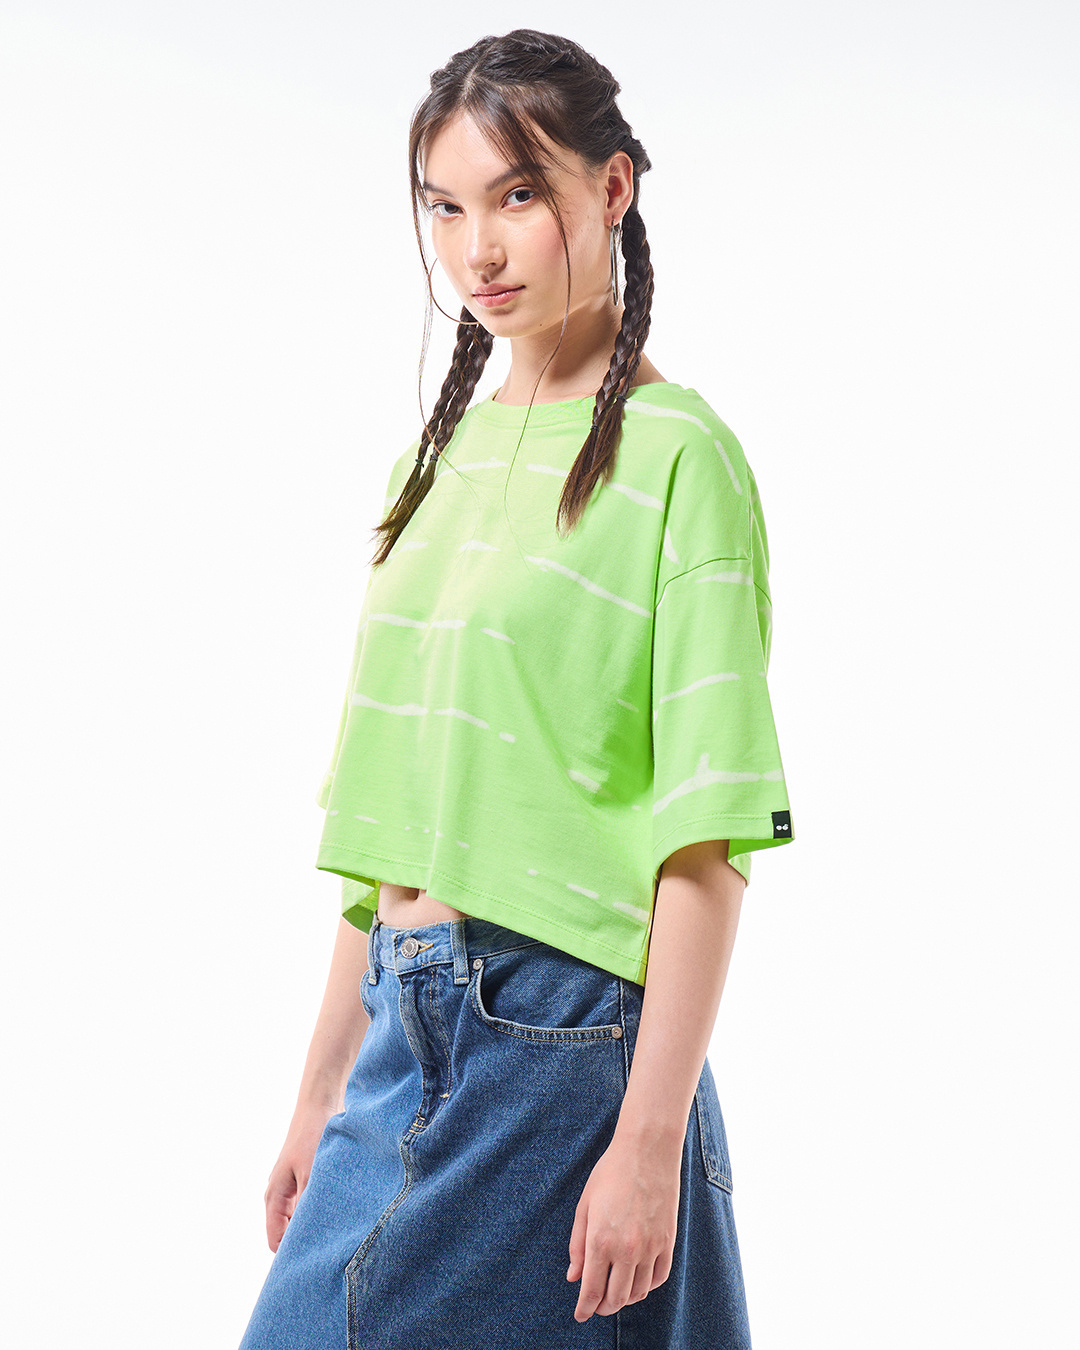 Shop Women's Green All Over Printed Oversized Short Top-Back